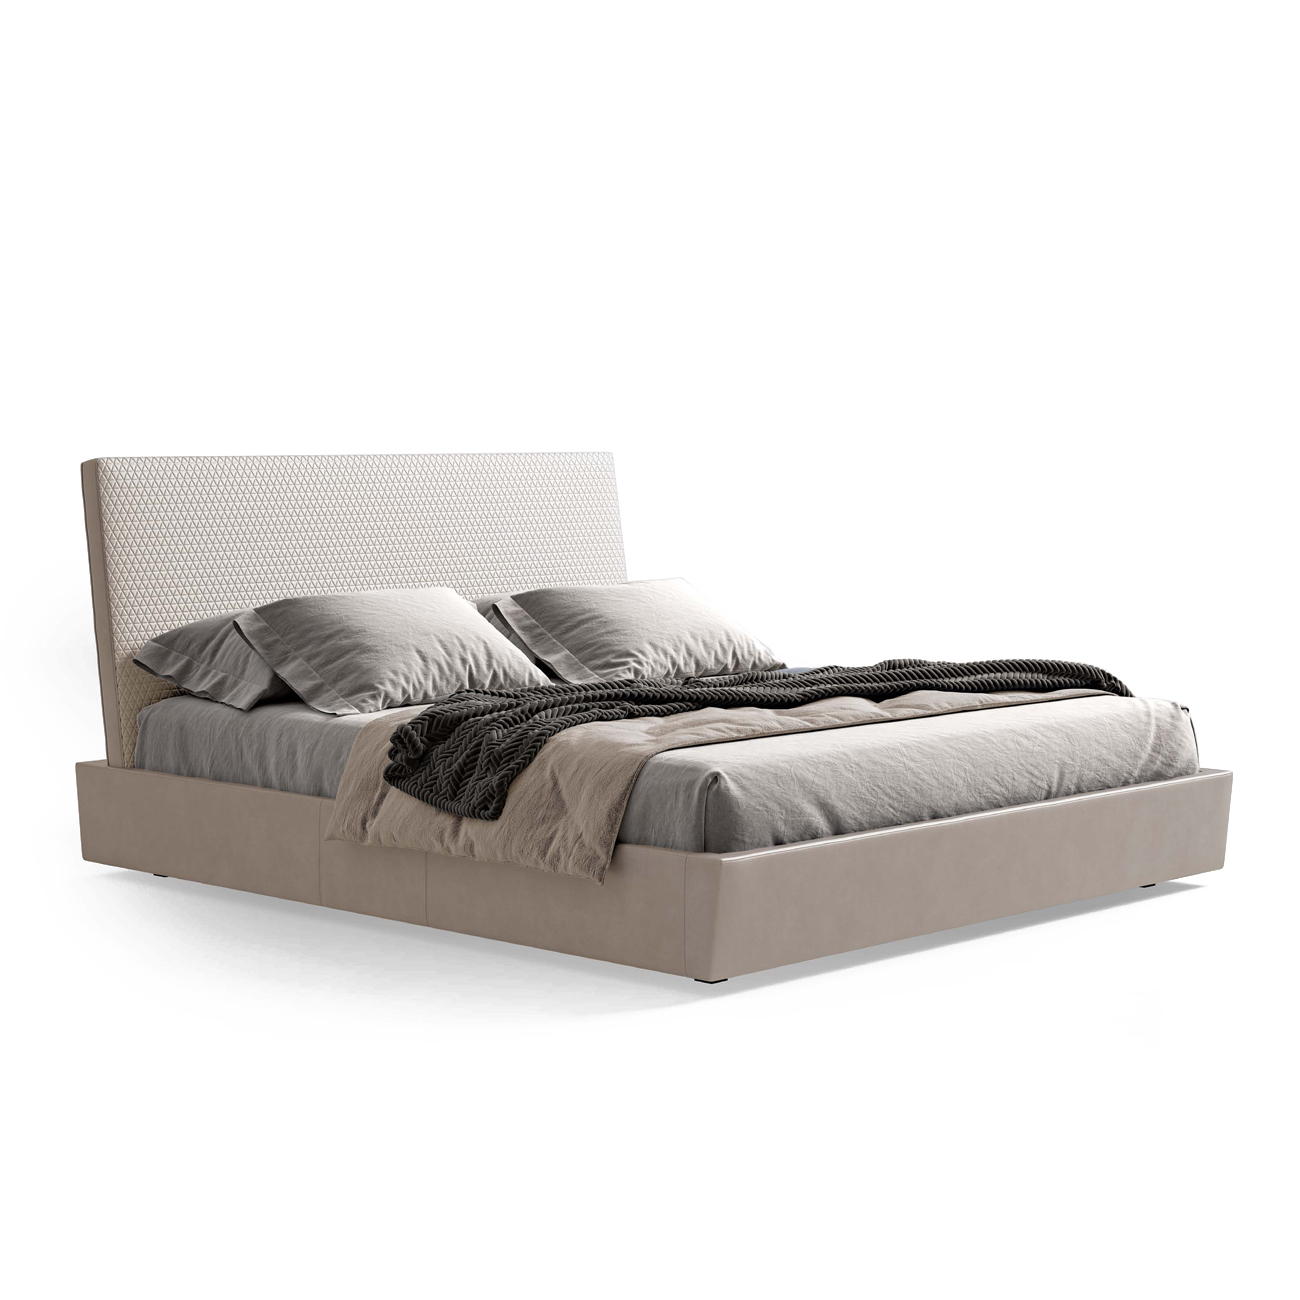 MUST HAVE BED – one